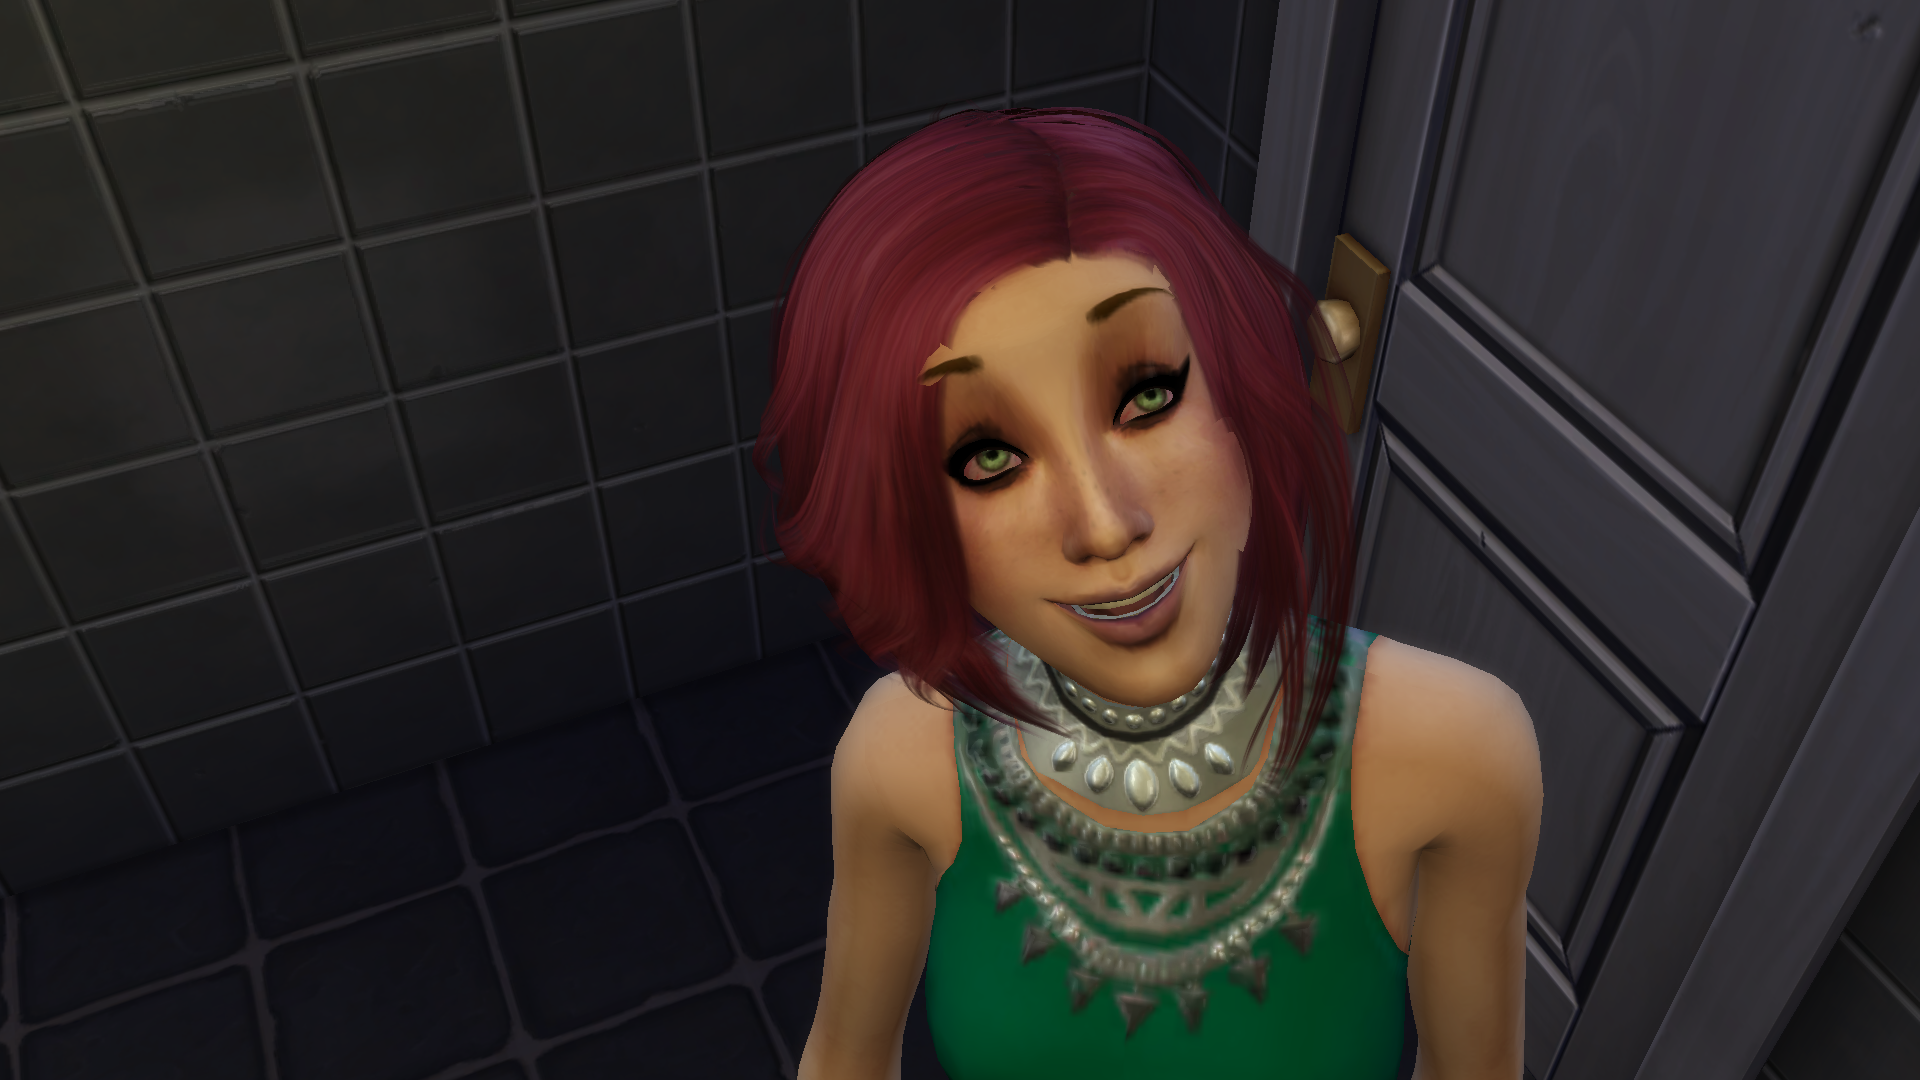 Hot Complications Sims Story Page 4 The Sims 4 General Discussion